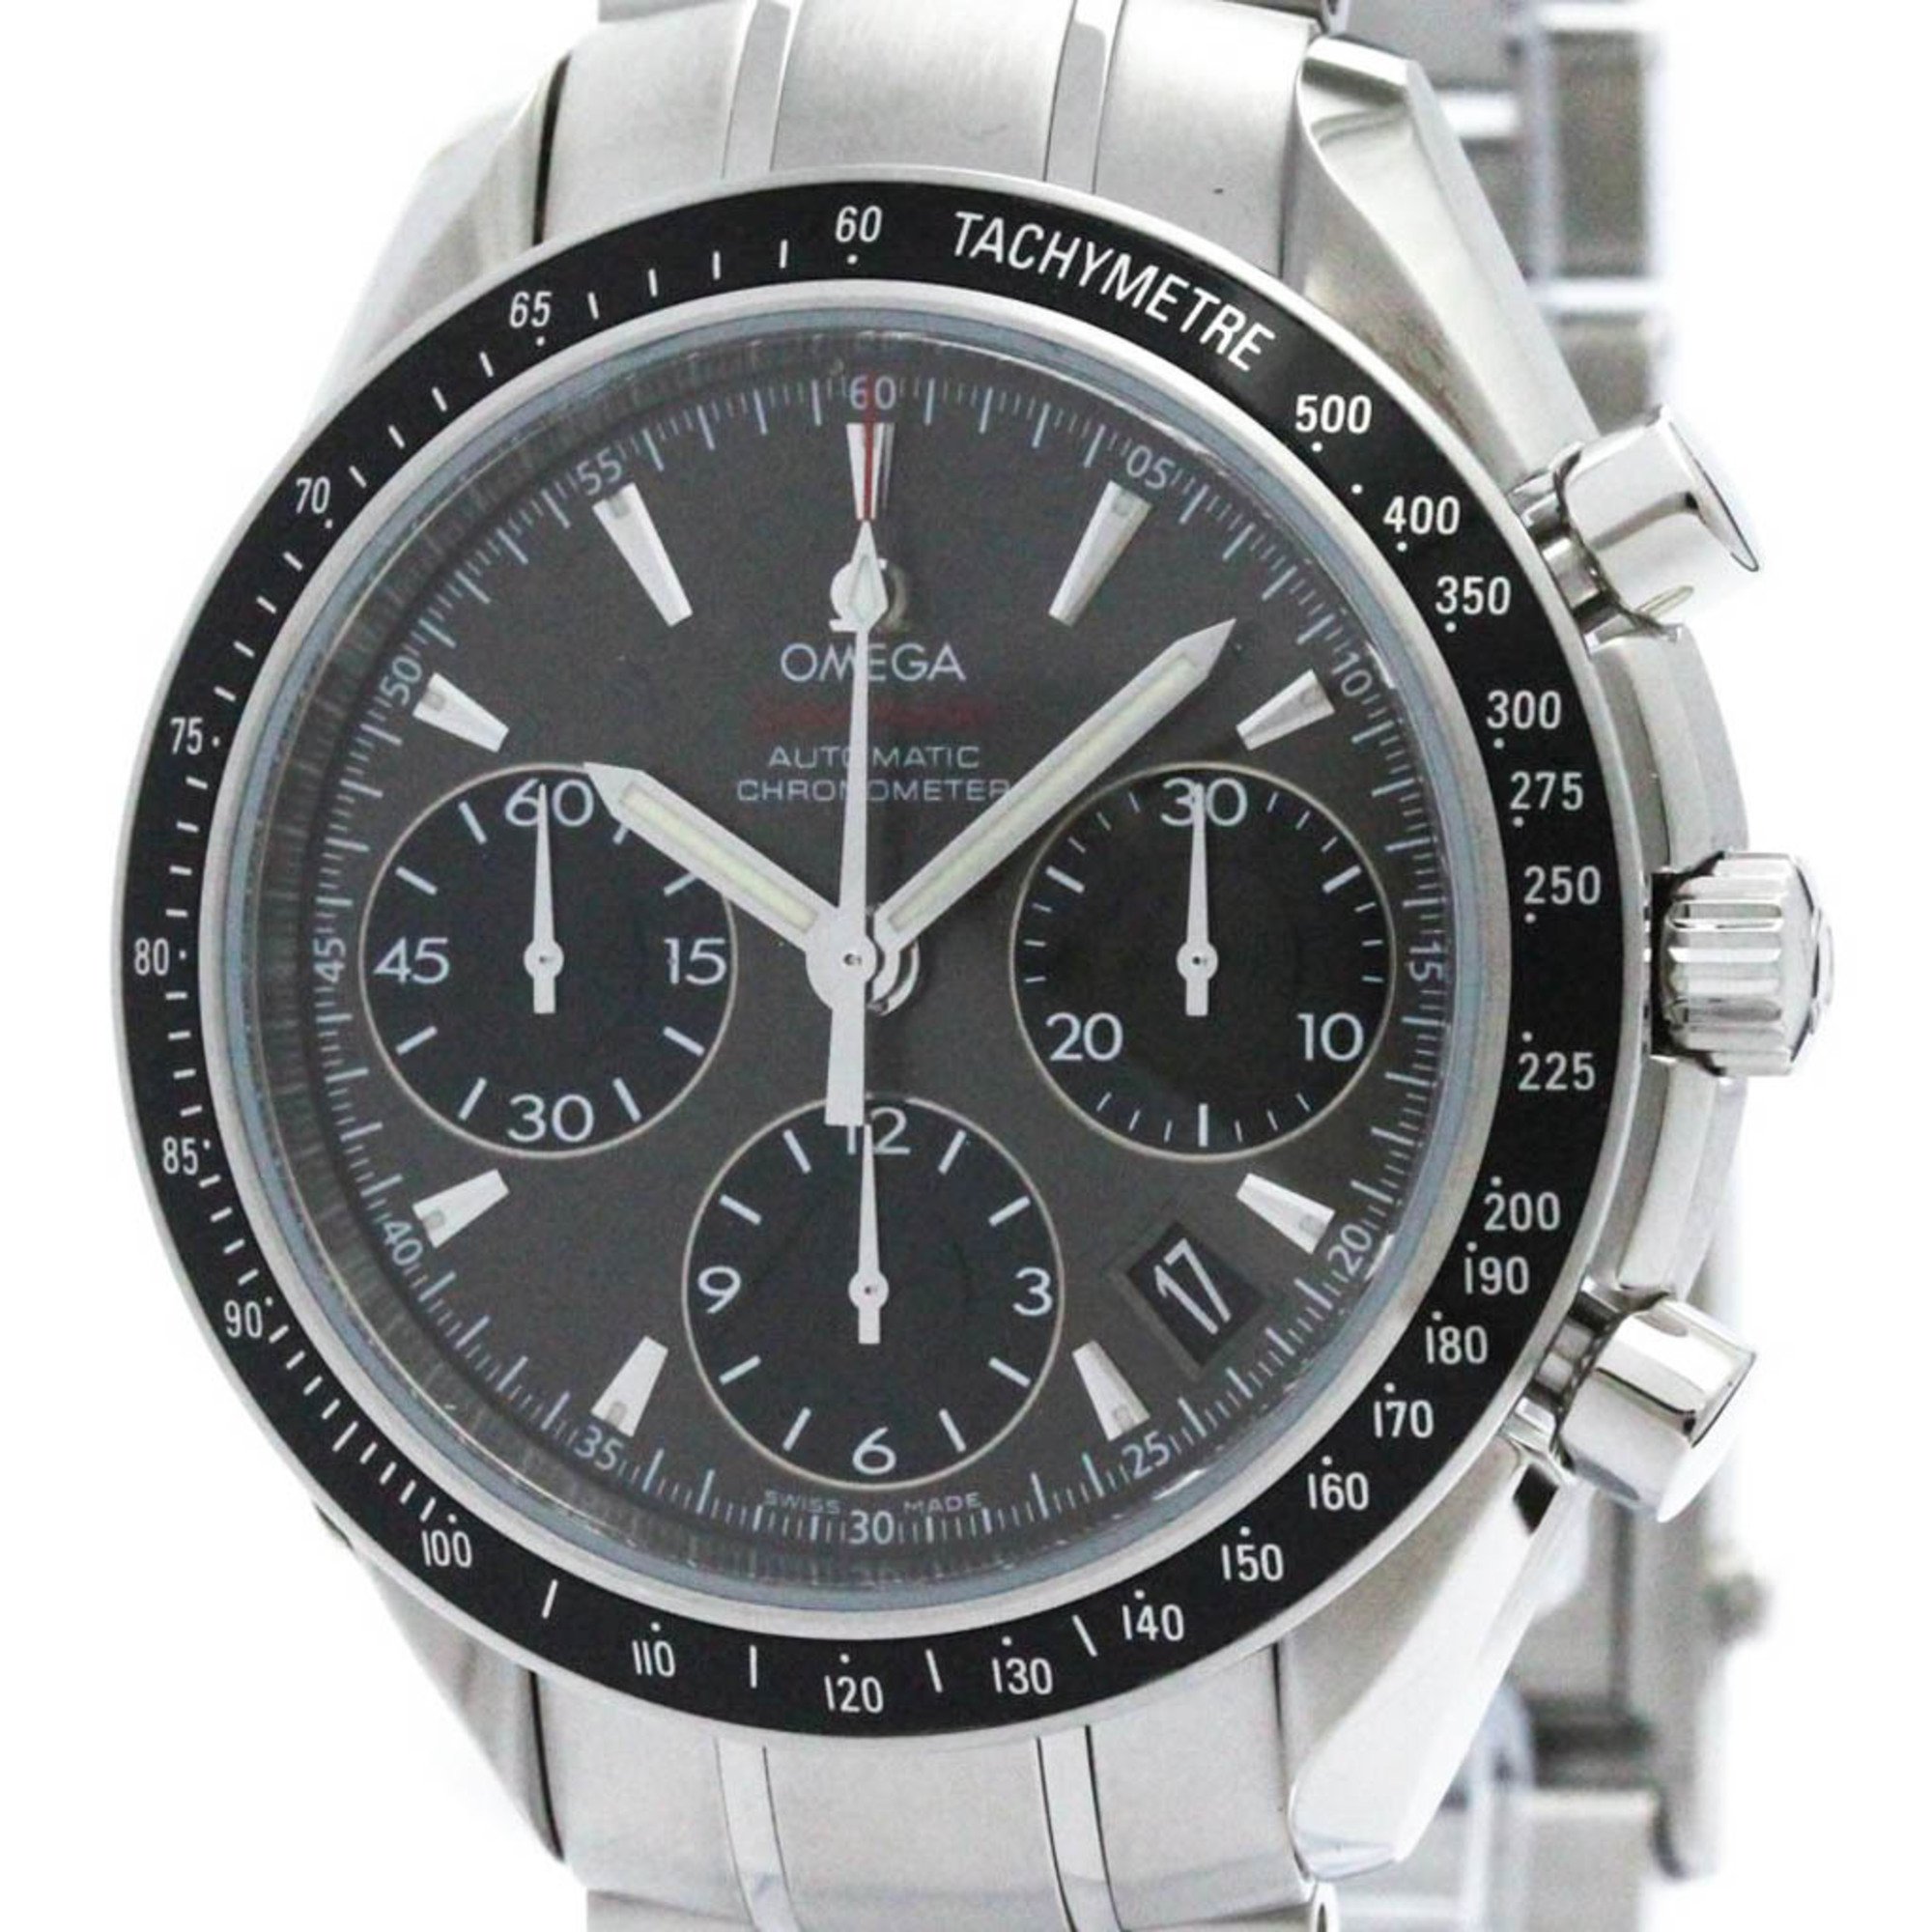 Polished OMEGA Speedmaster Date Automatic Watch 323.30.40.40.06.001 BF572355